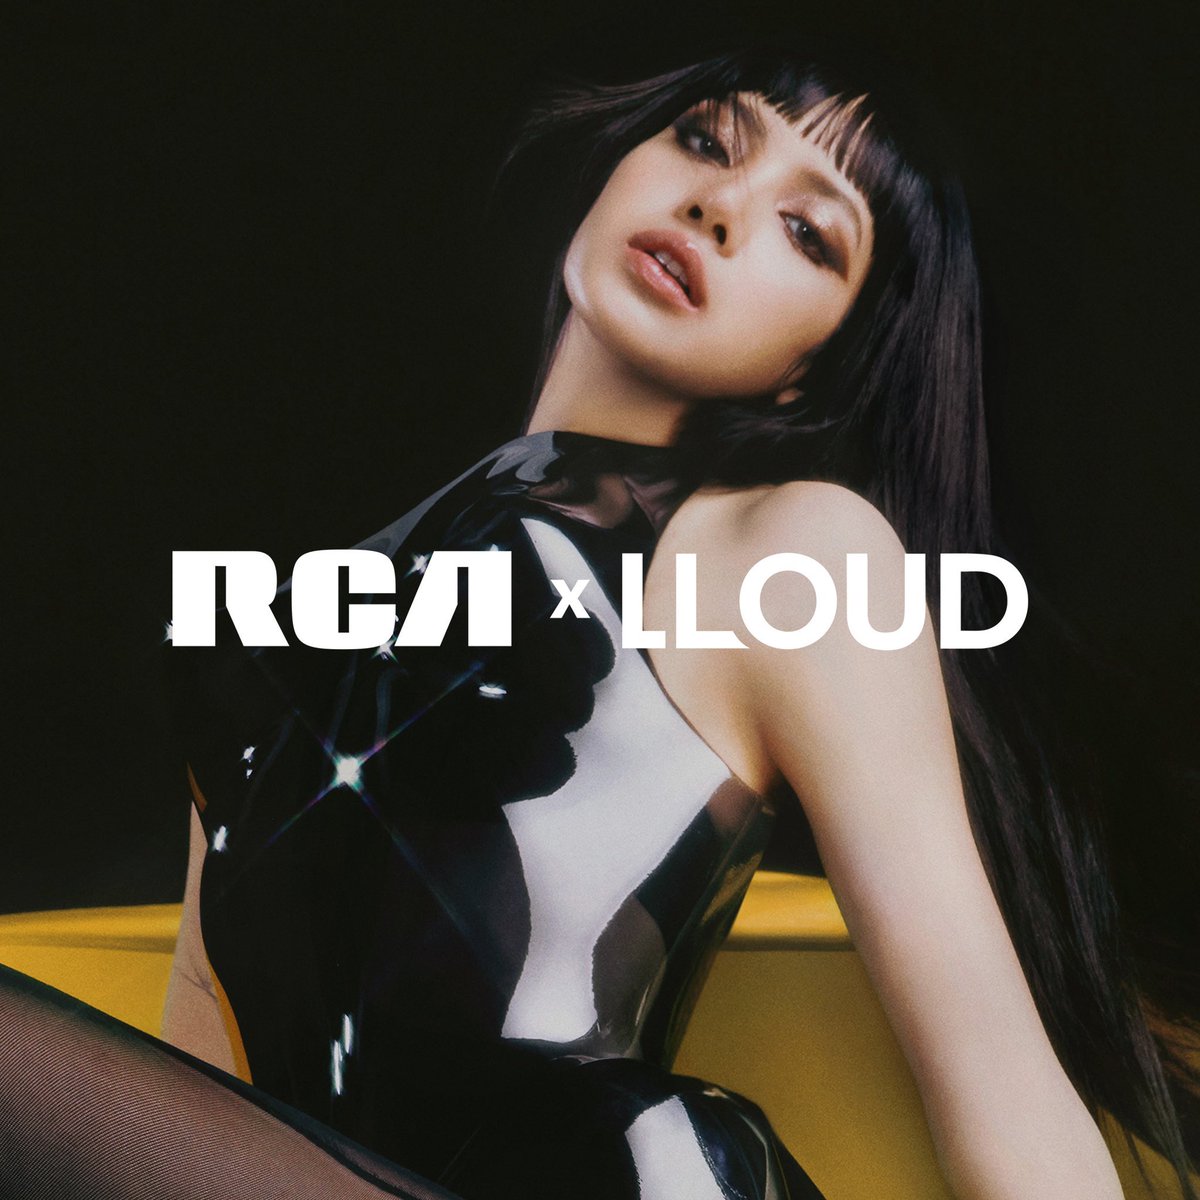 BLACKPINK’S LISA officially signs with RCA💫